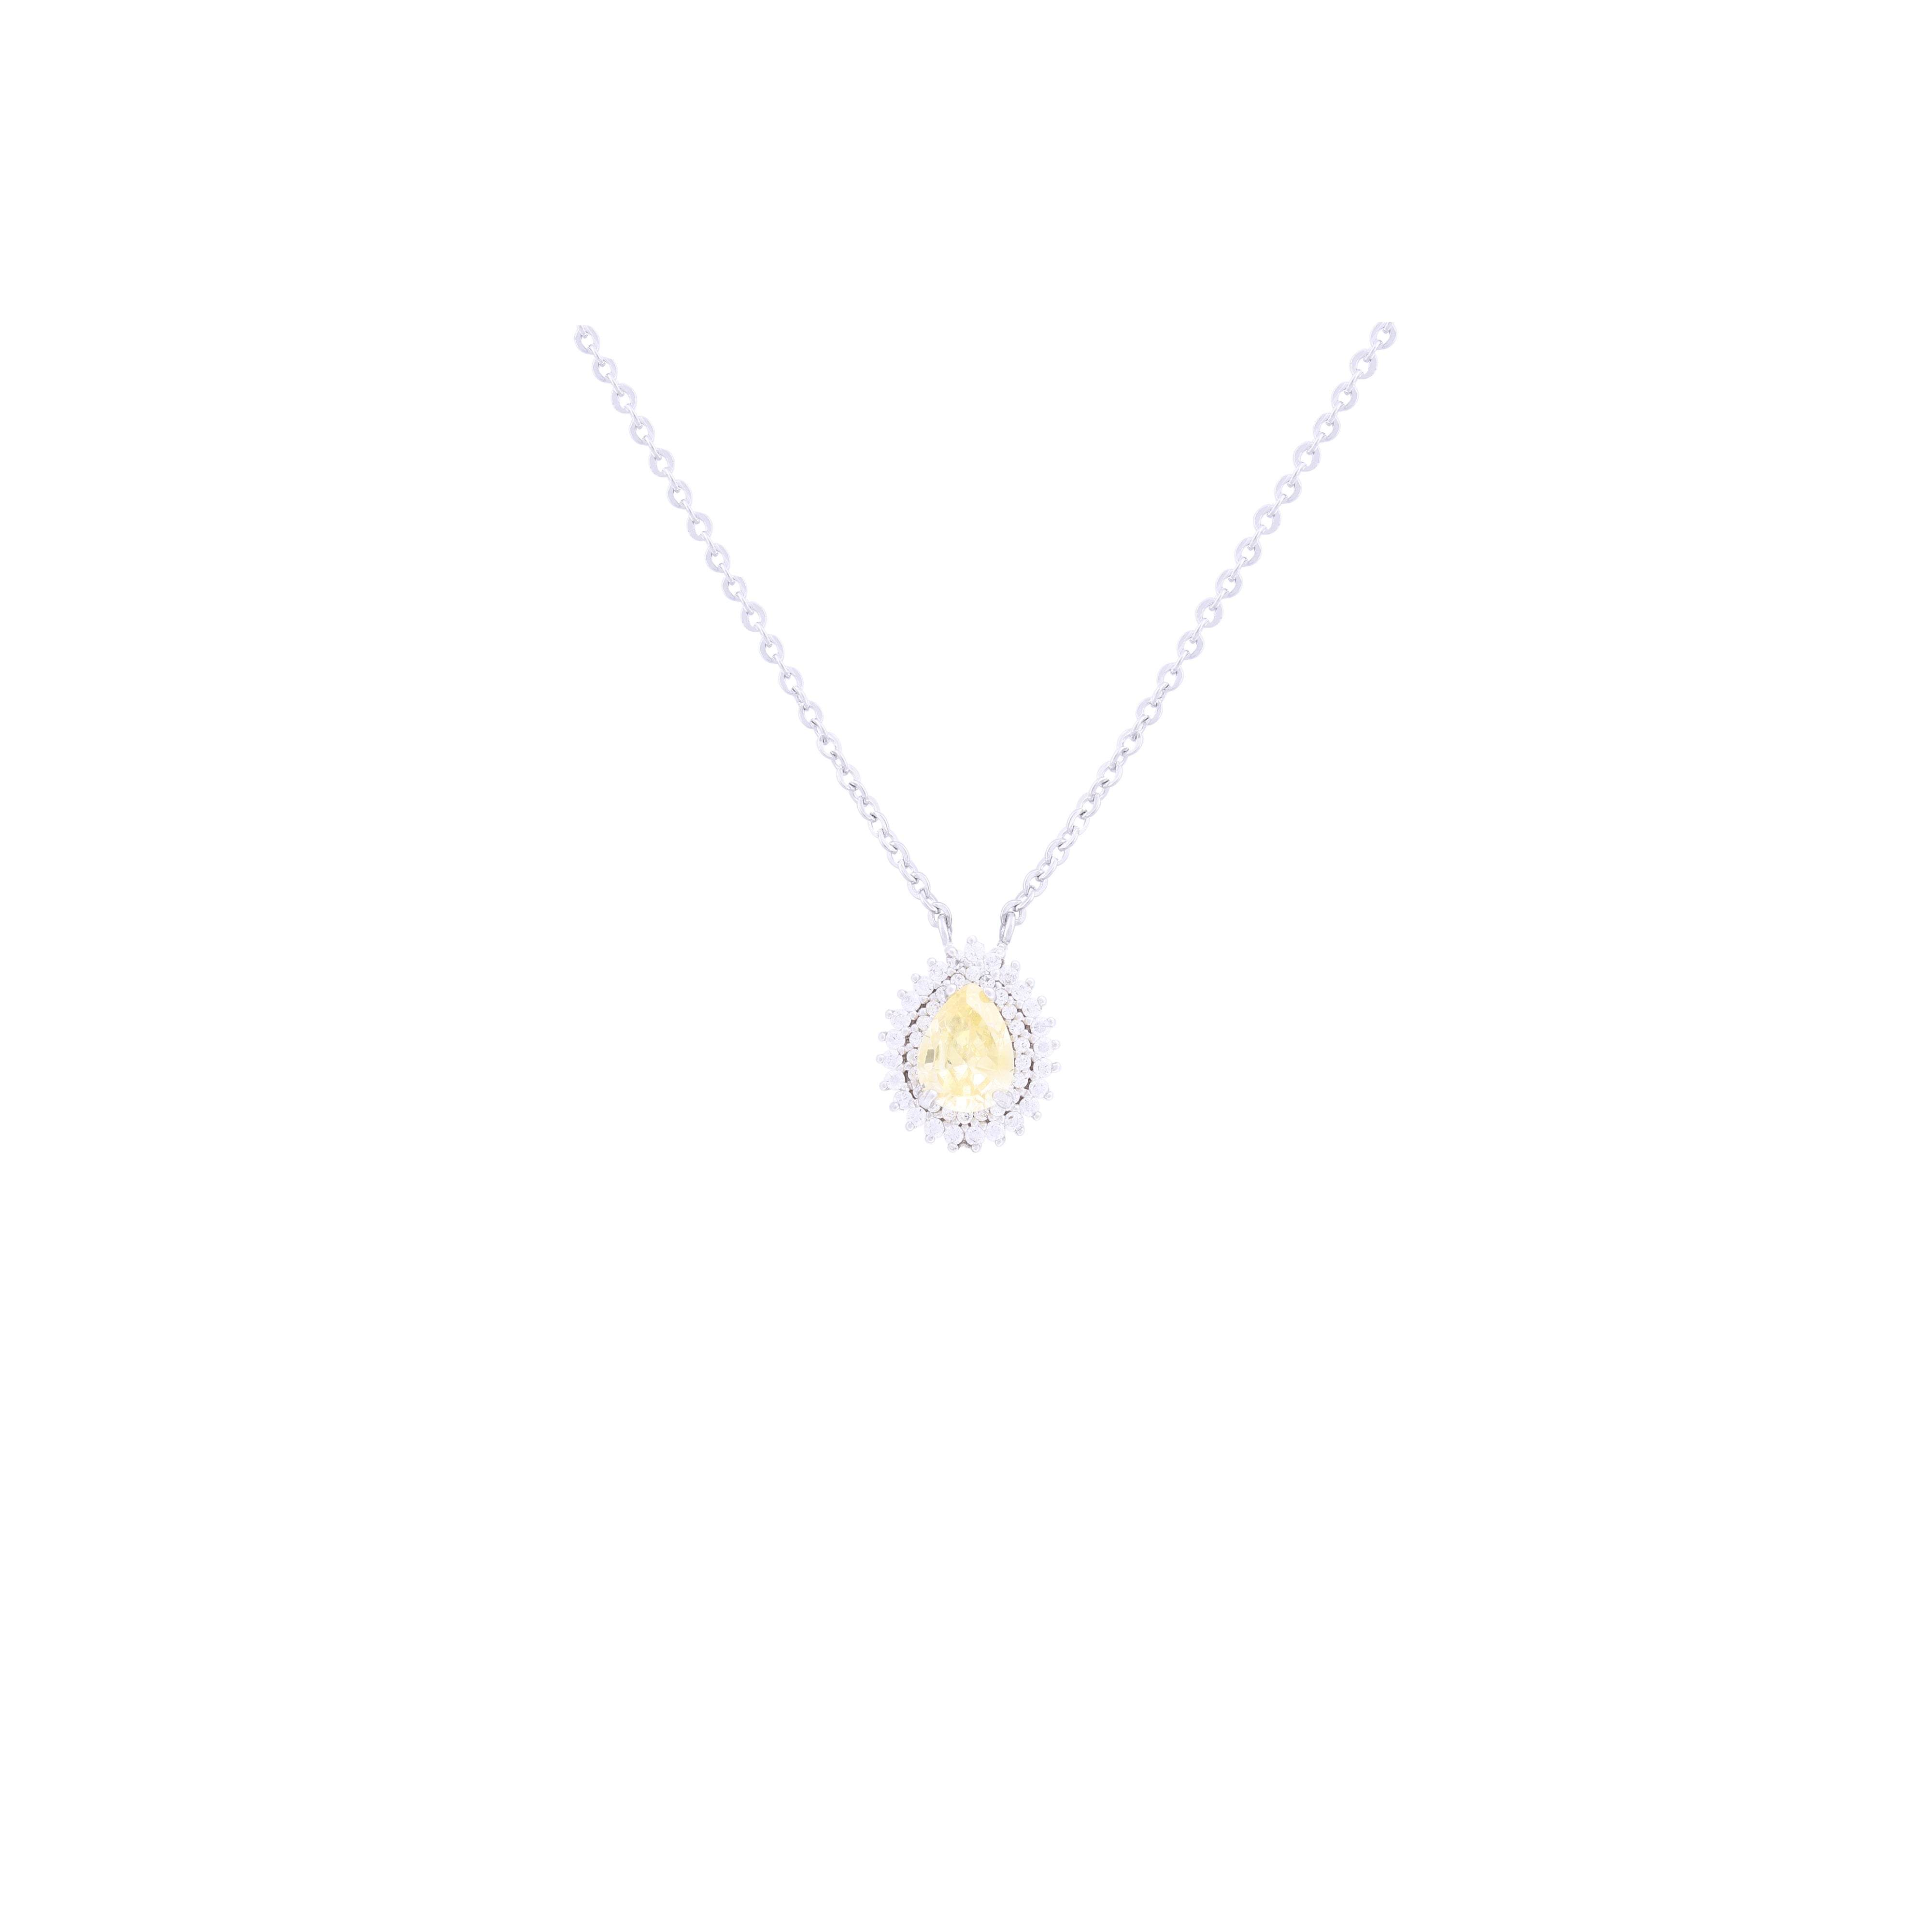 Asfour Crystal 925 Sterling Silver Chain Necklace With Yellow Pendant